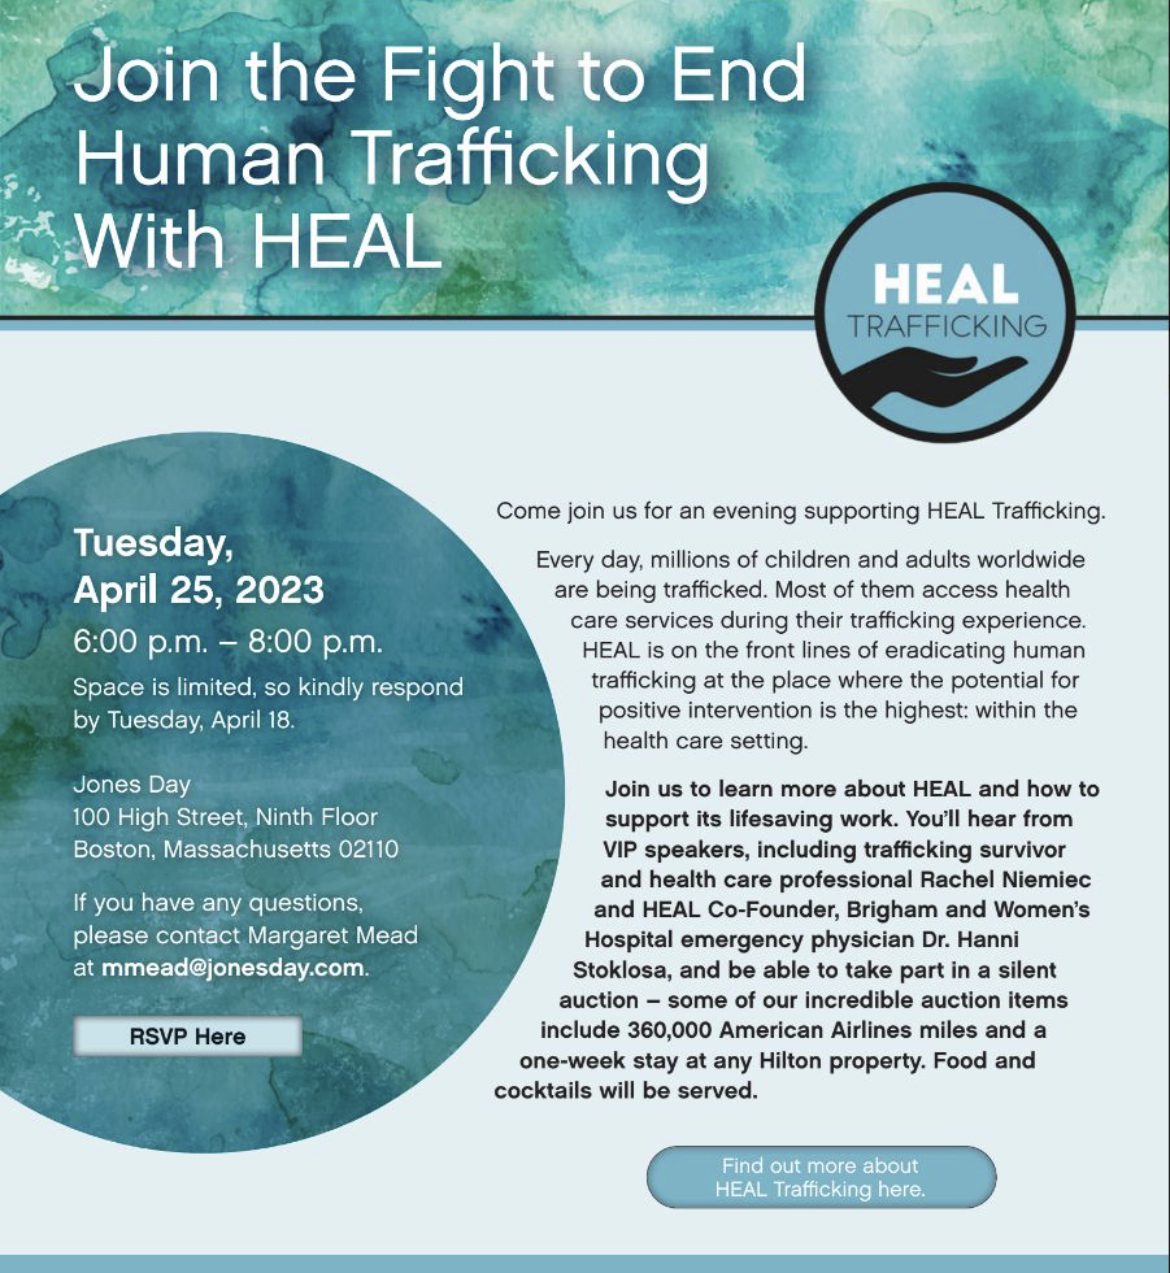 Join the Fight to End Human Trafficking with HEAL